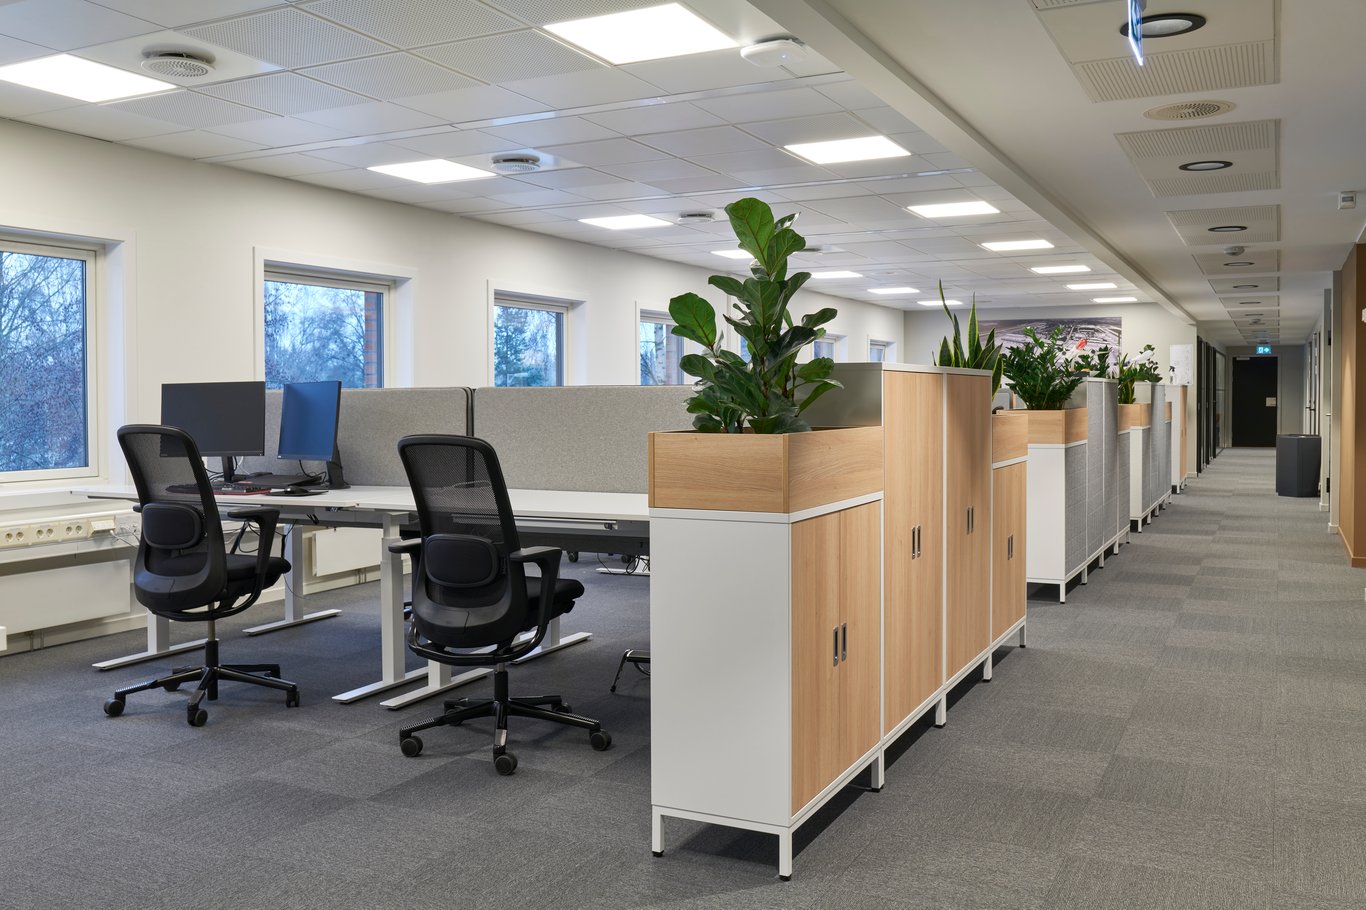 Open plan office with desks, office chairs, mid-height cabinets and plants.